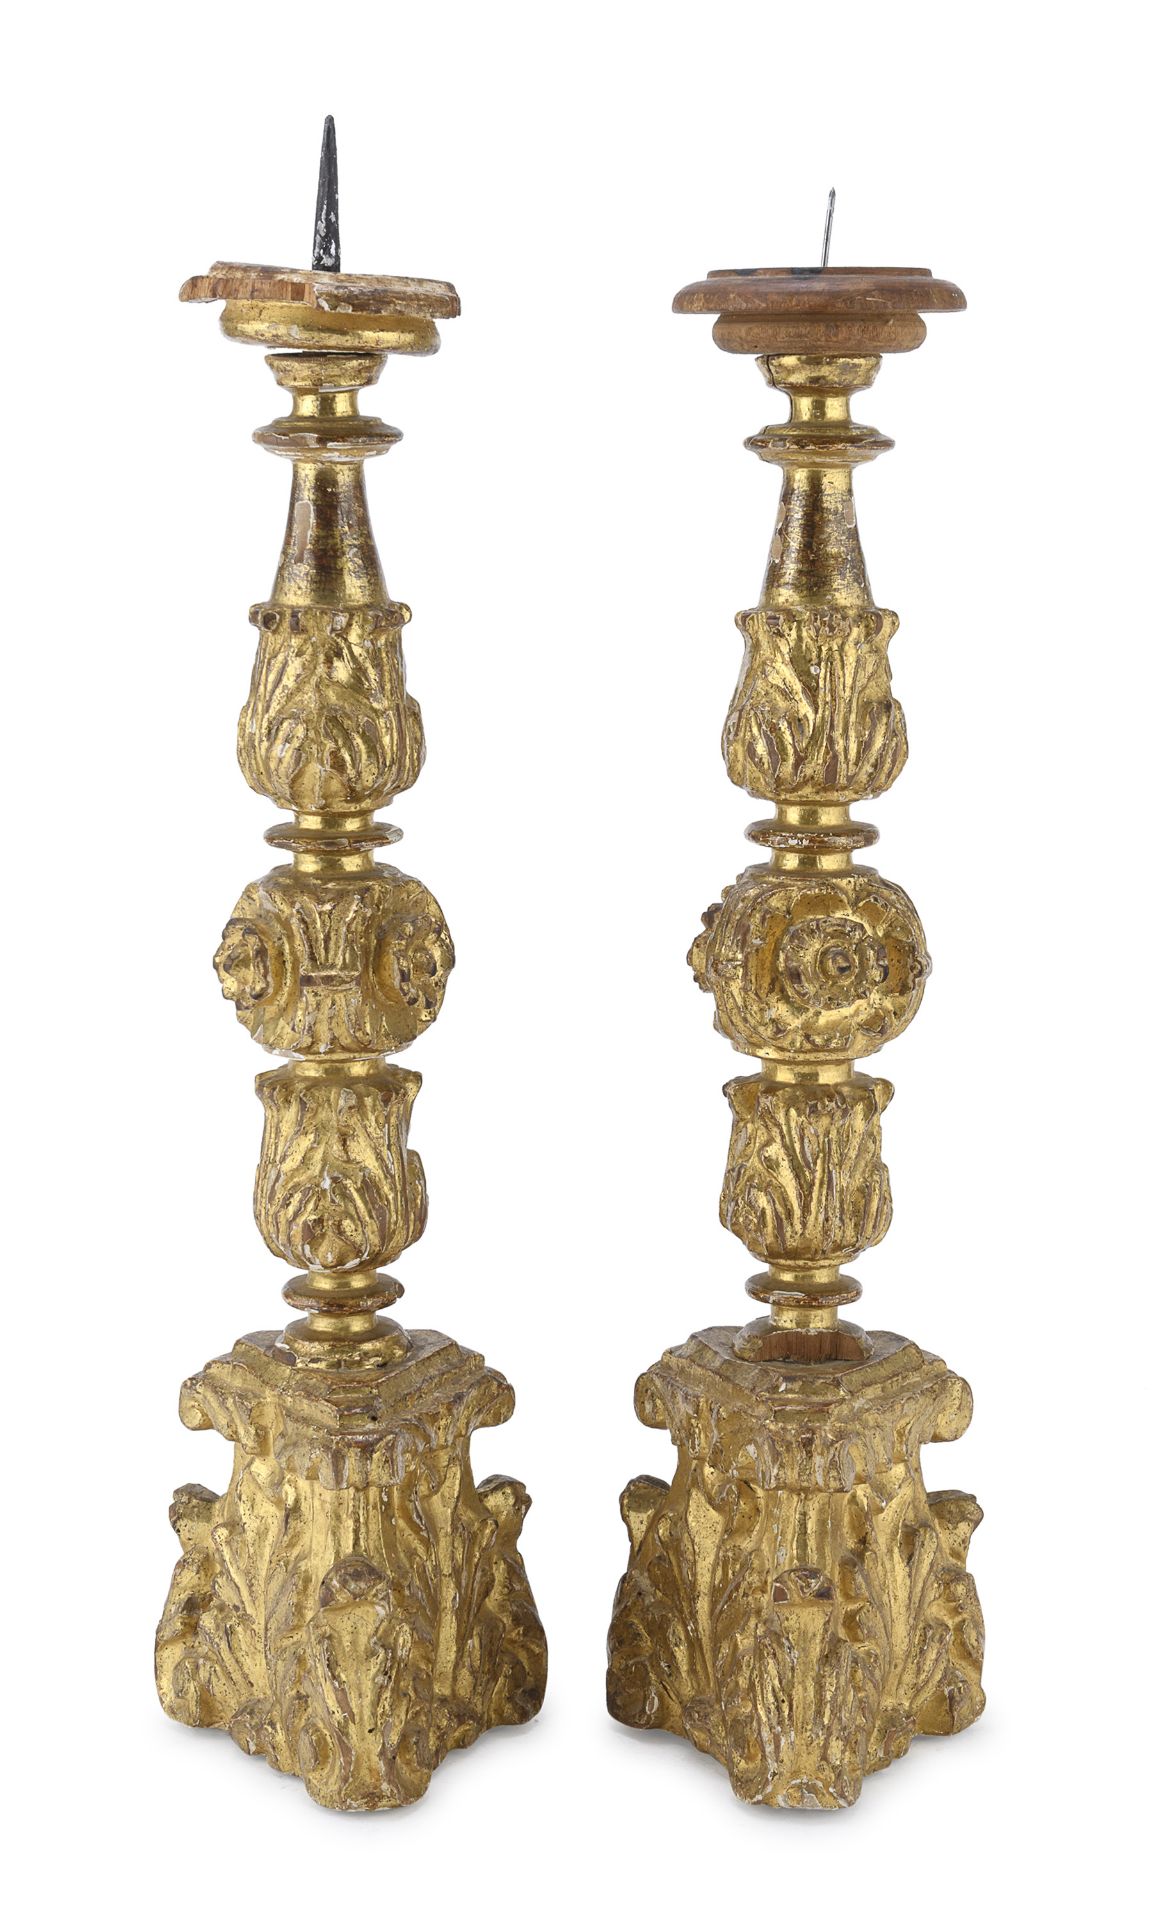 PAIR OF GILTWOOD CANDLESTICKS MARCHE 18TH CENTURY